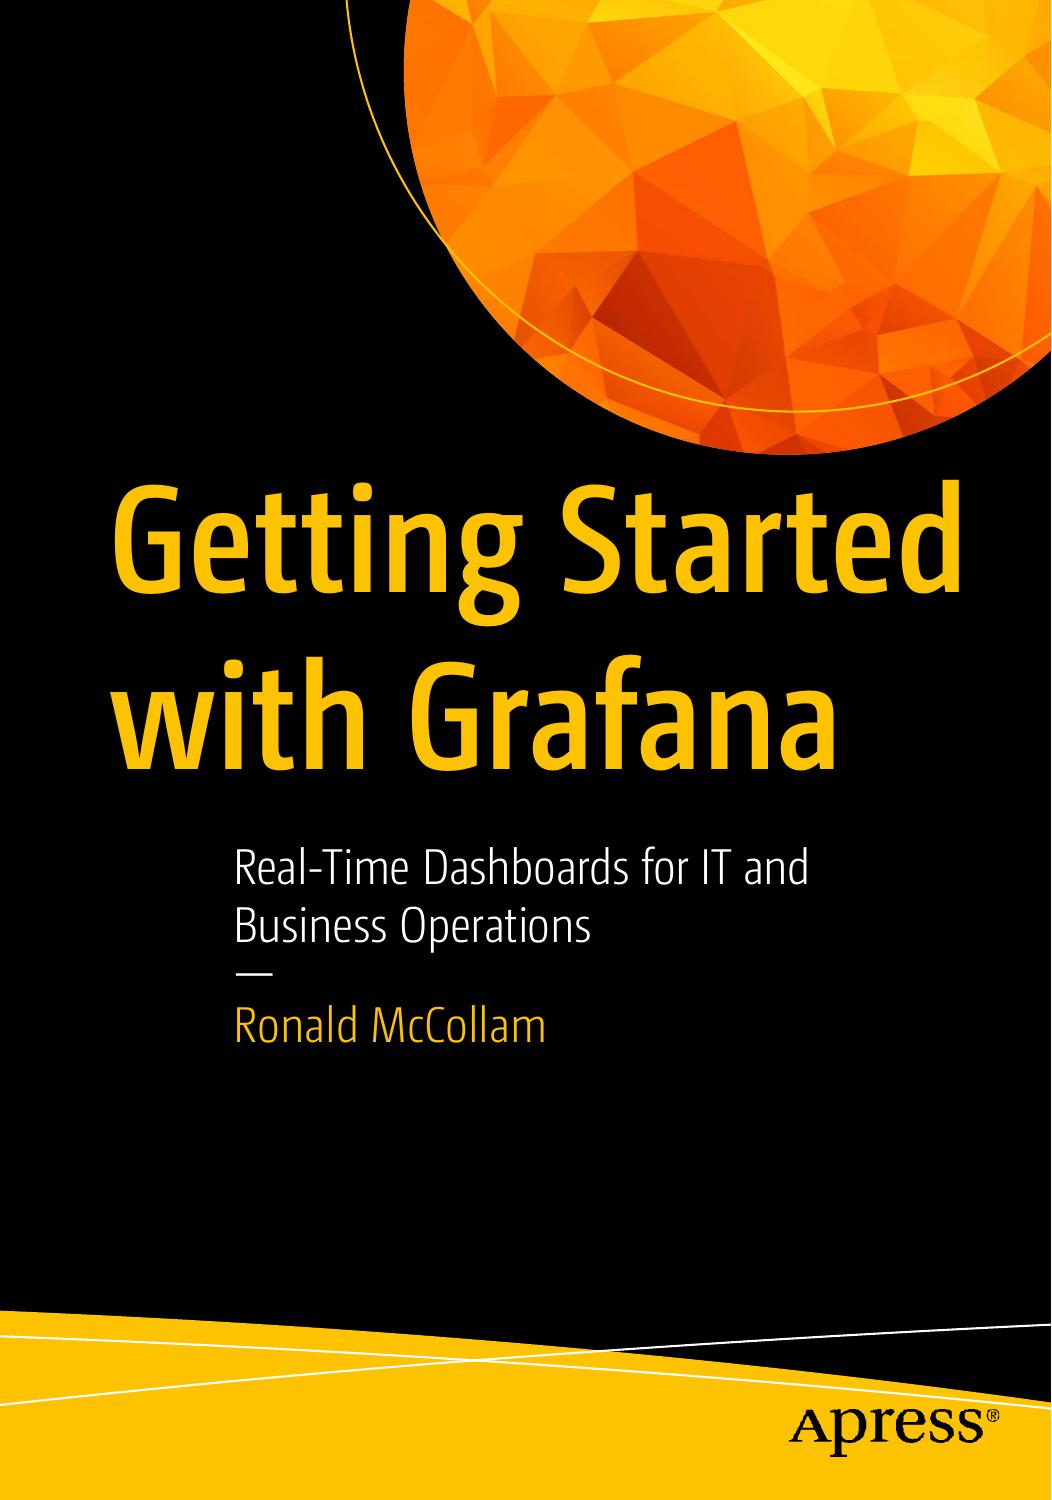 Getting Started With Grafana: Real-Time Dashboards for IT and Business Operations